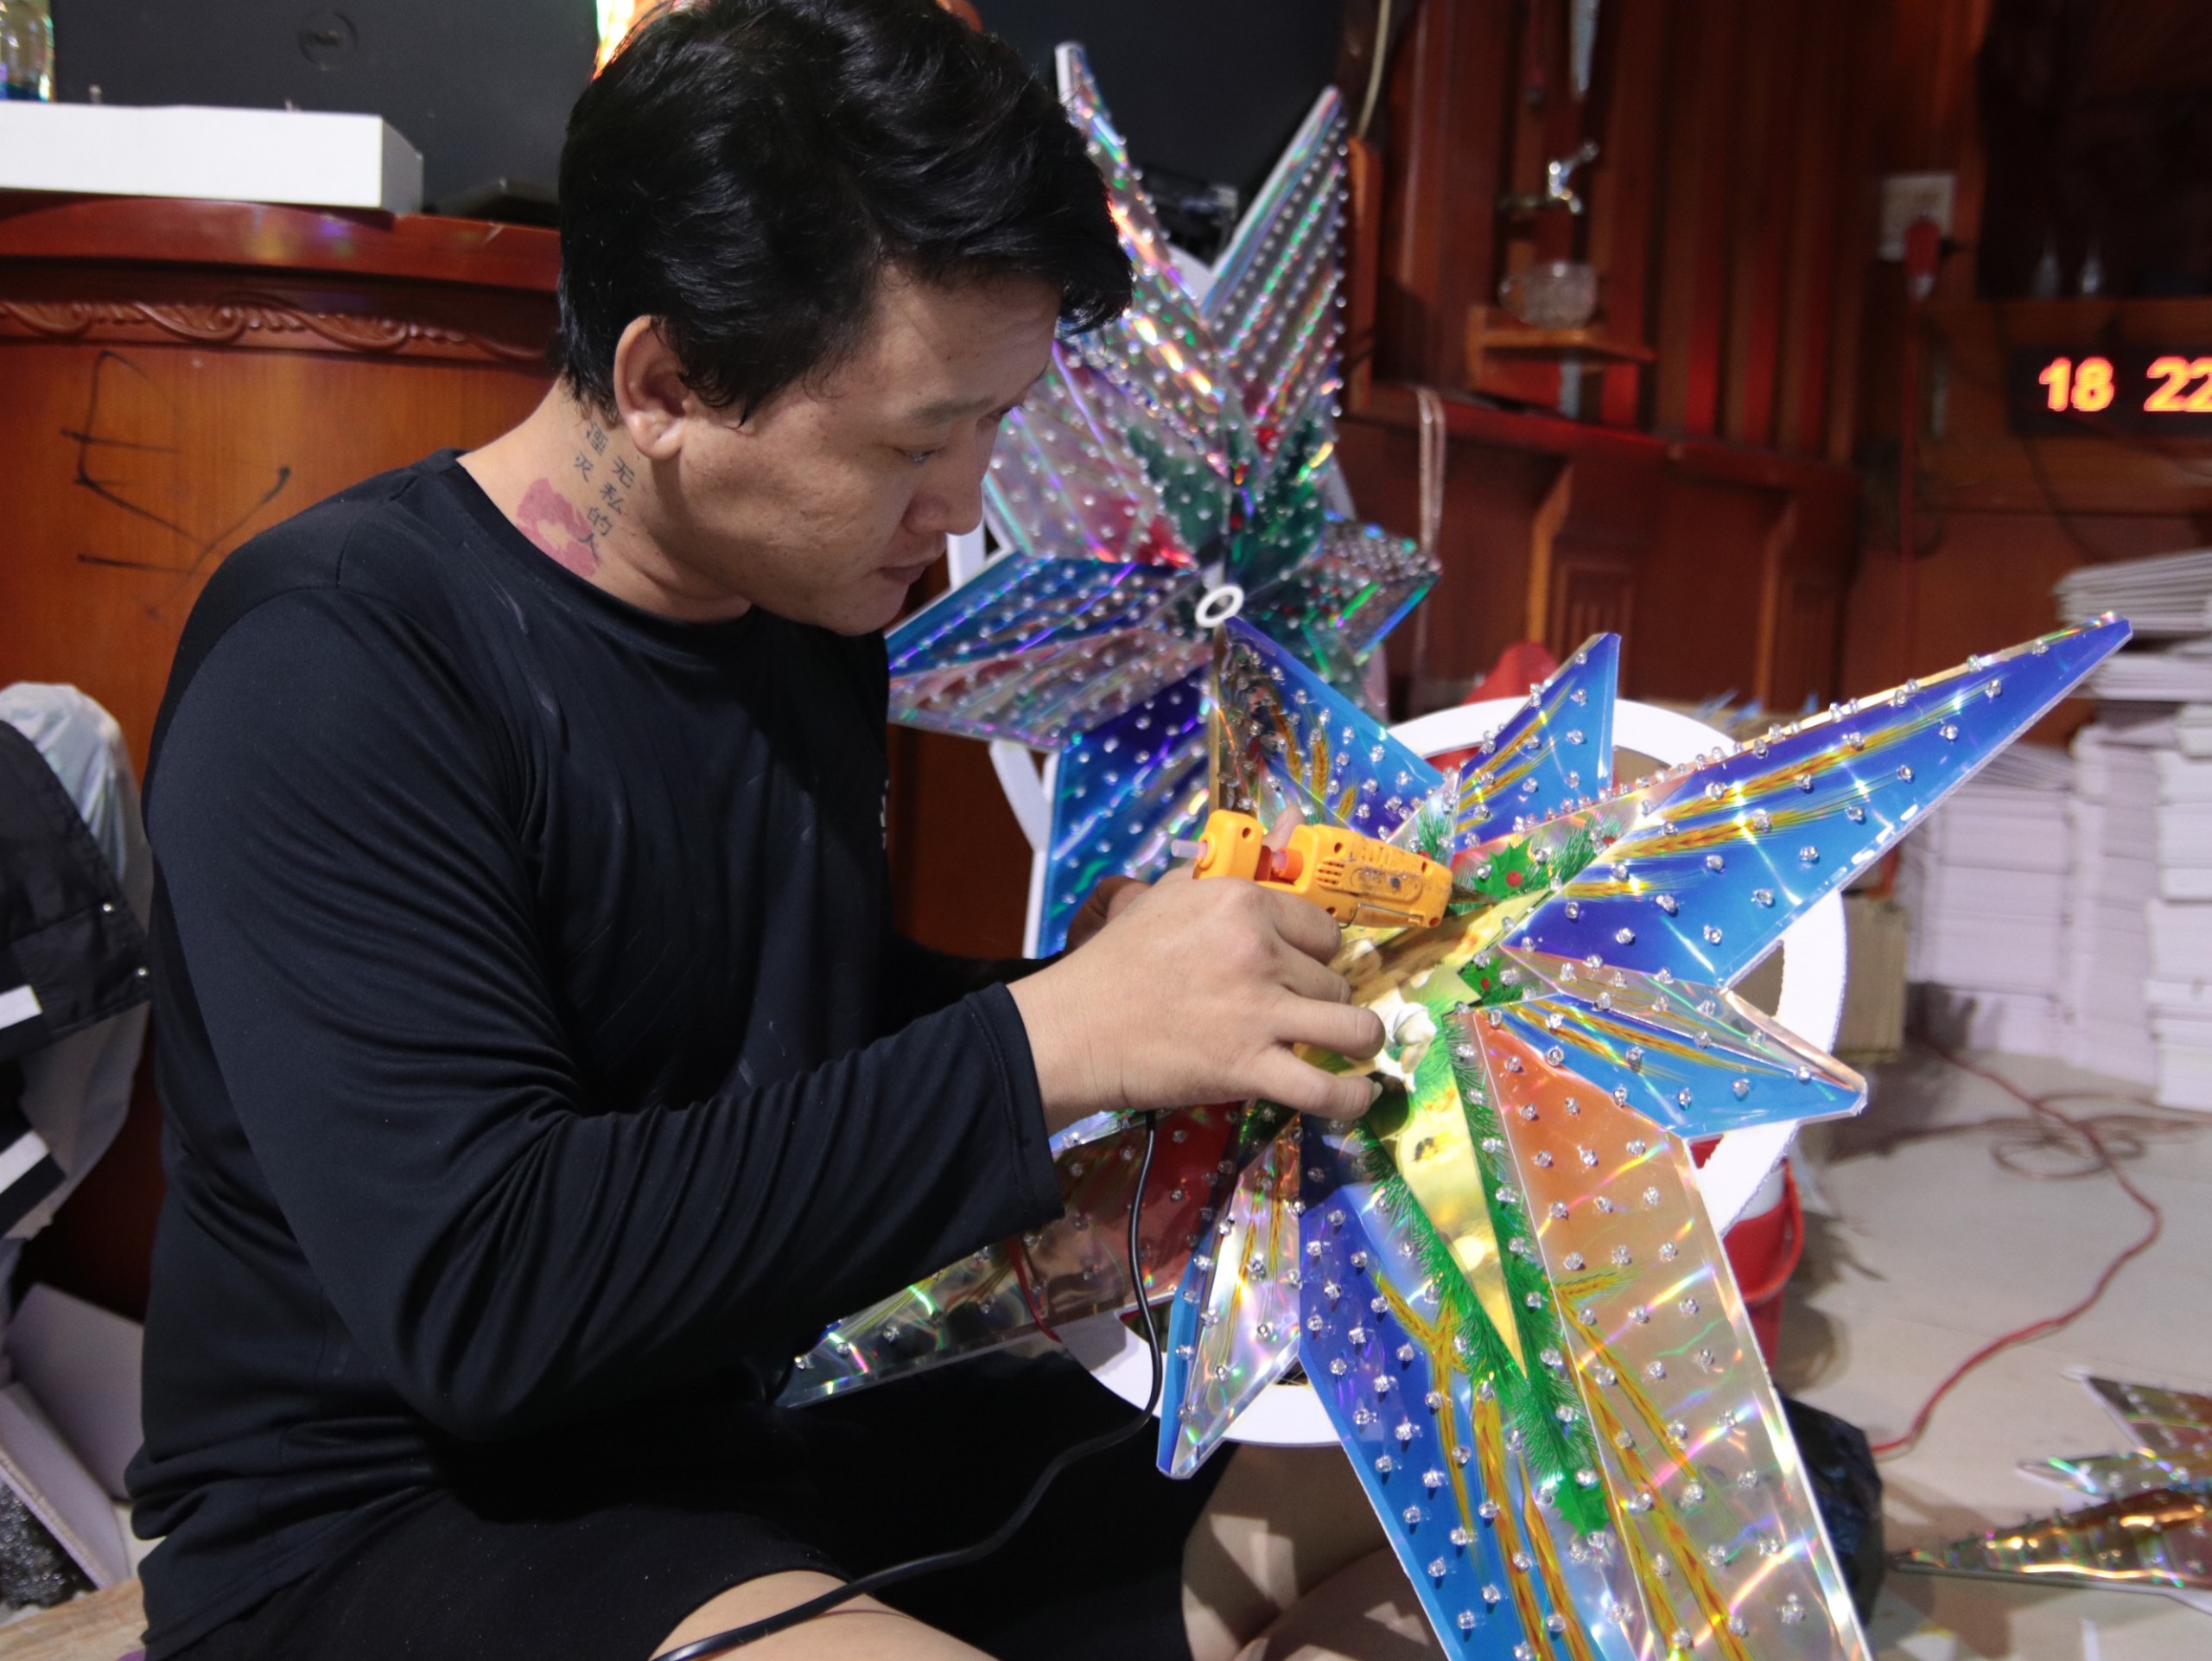 A worker is completing the final steps for a Christmas star at Cuu’s workshop. Photo: Minh Chau / Tuoi Tre News